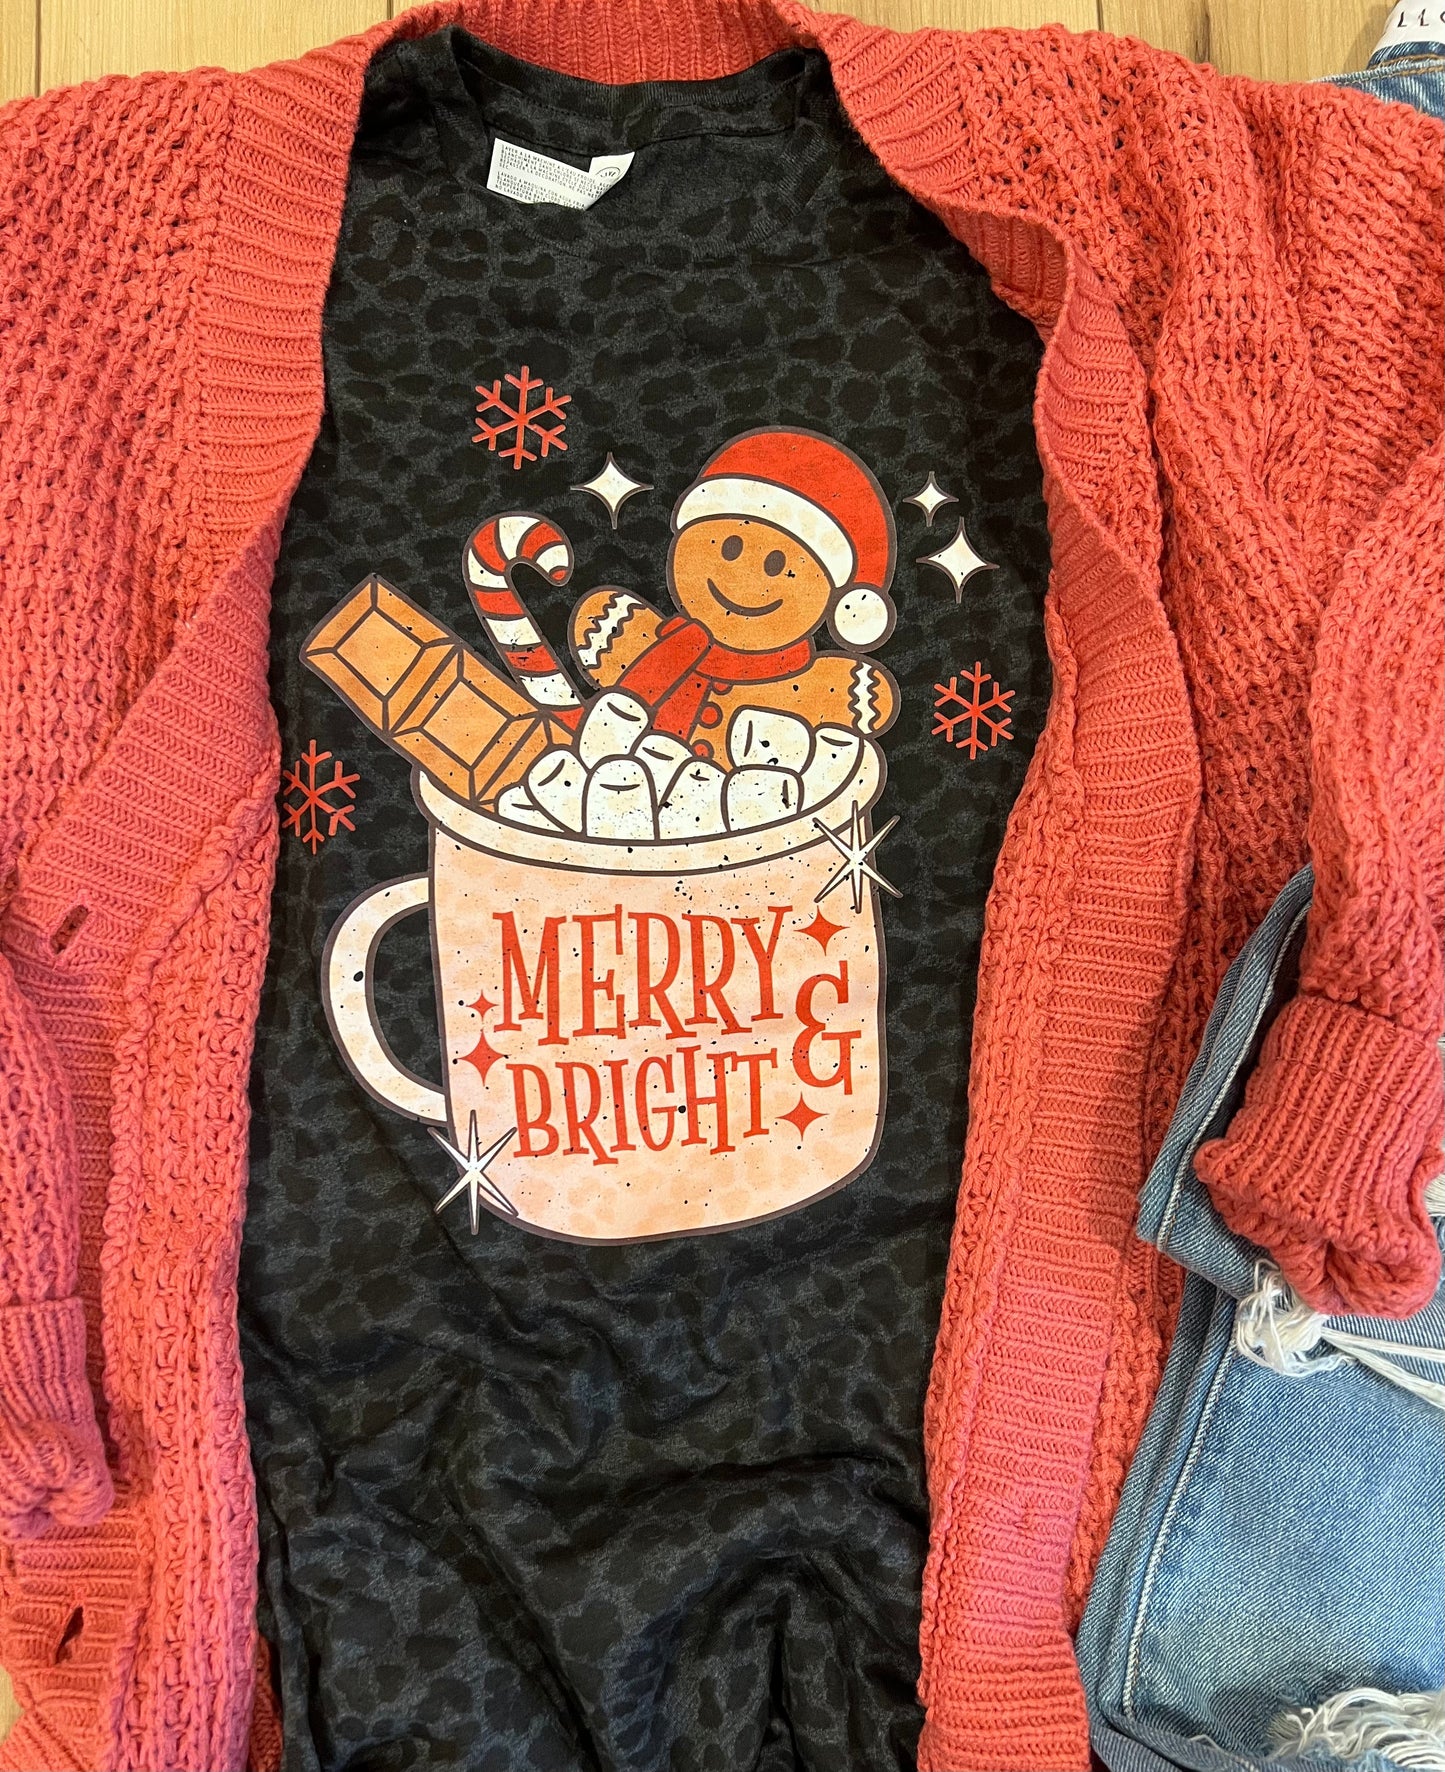 Merry & Bright Gingerbread Cup PREORDER (SHIP DATE 10/13)